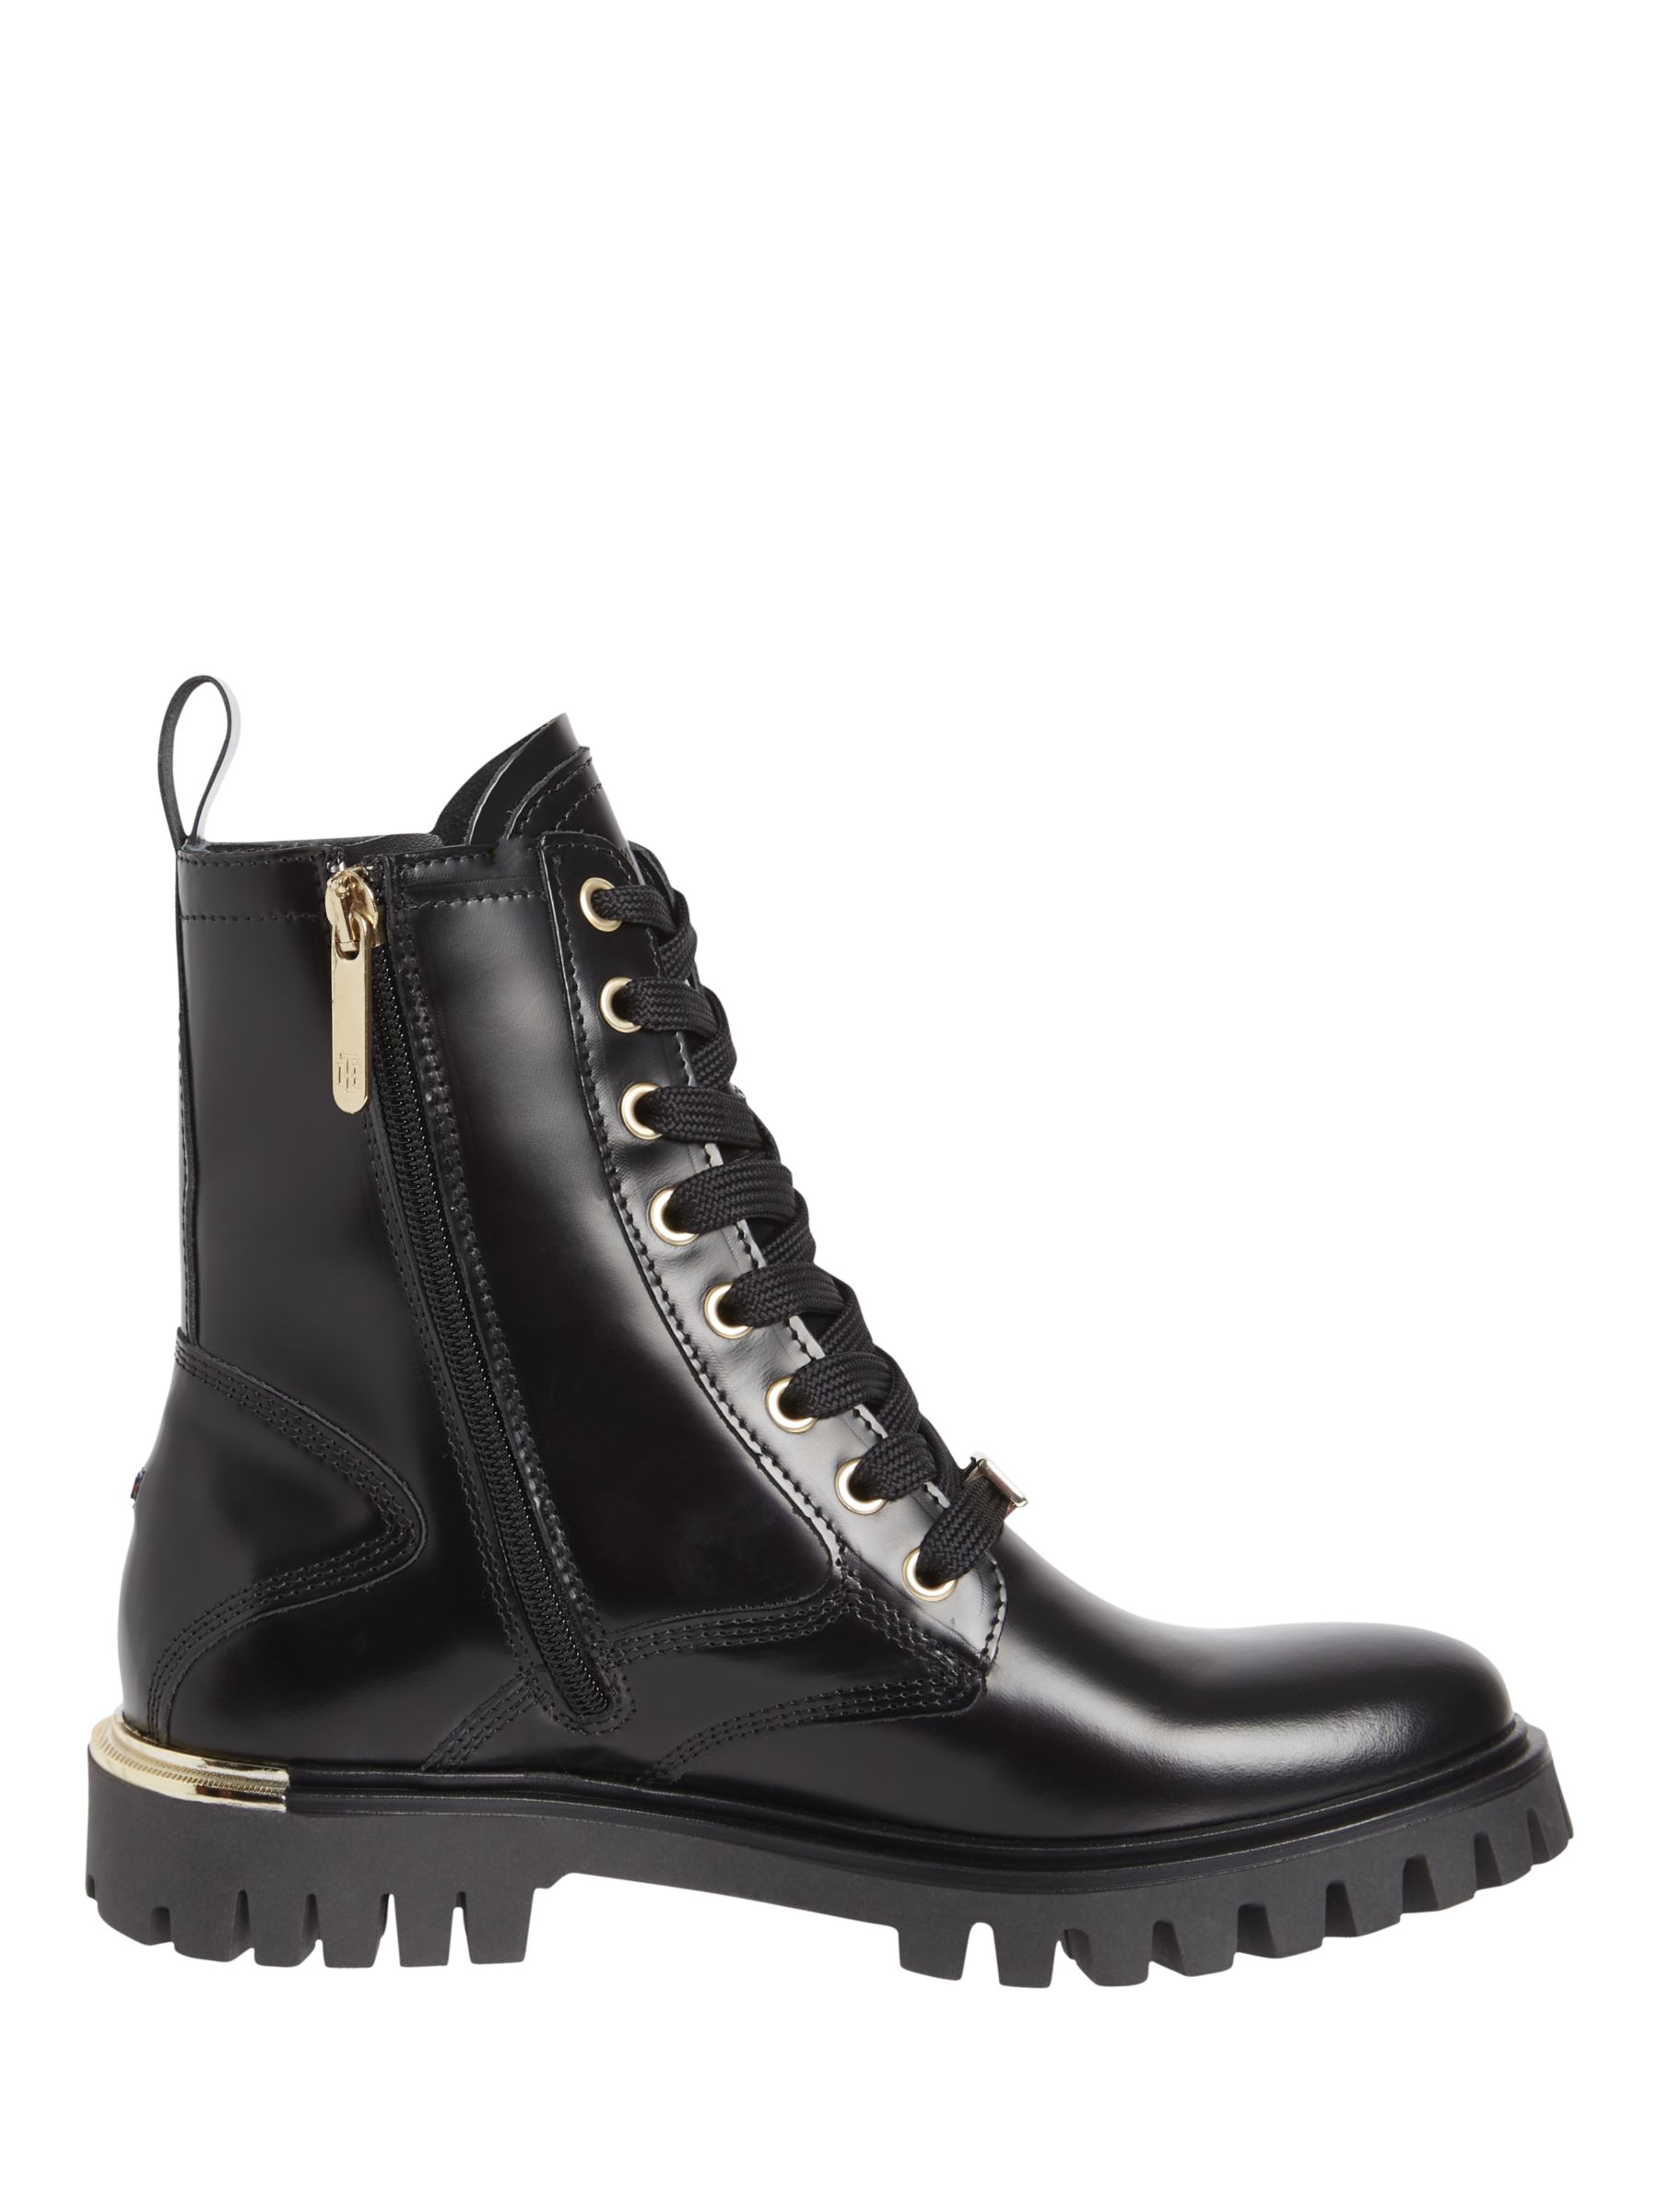 Tommy Hilfiger Polished Leather Lace-Up Ankle Boots, Black at John ...